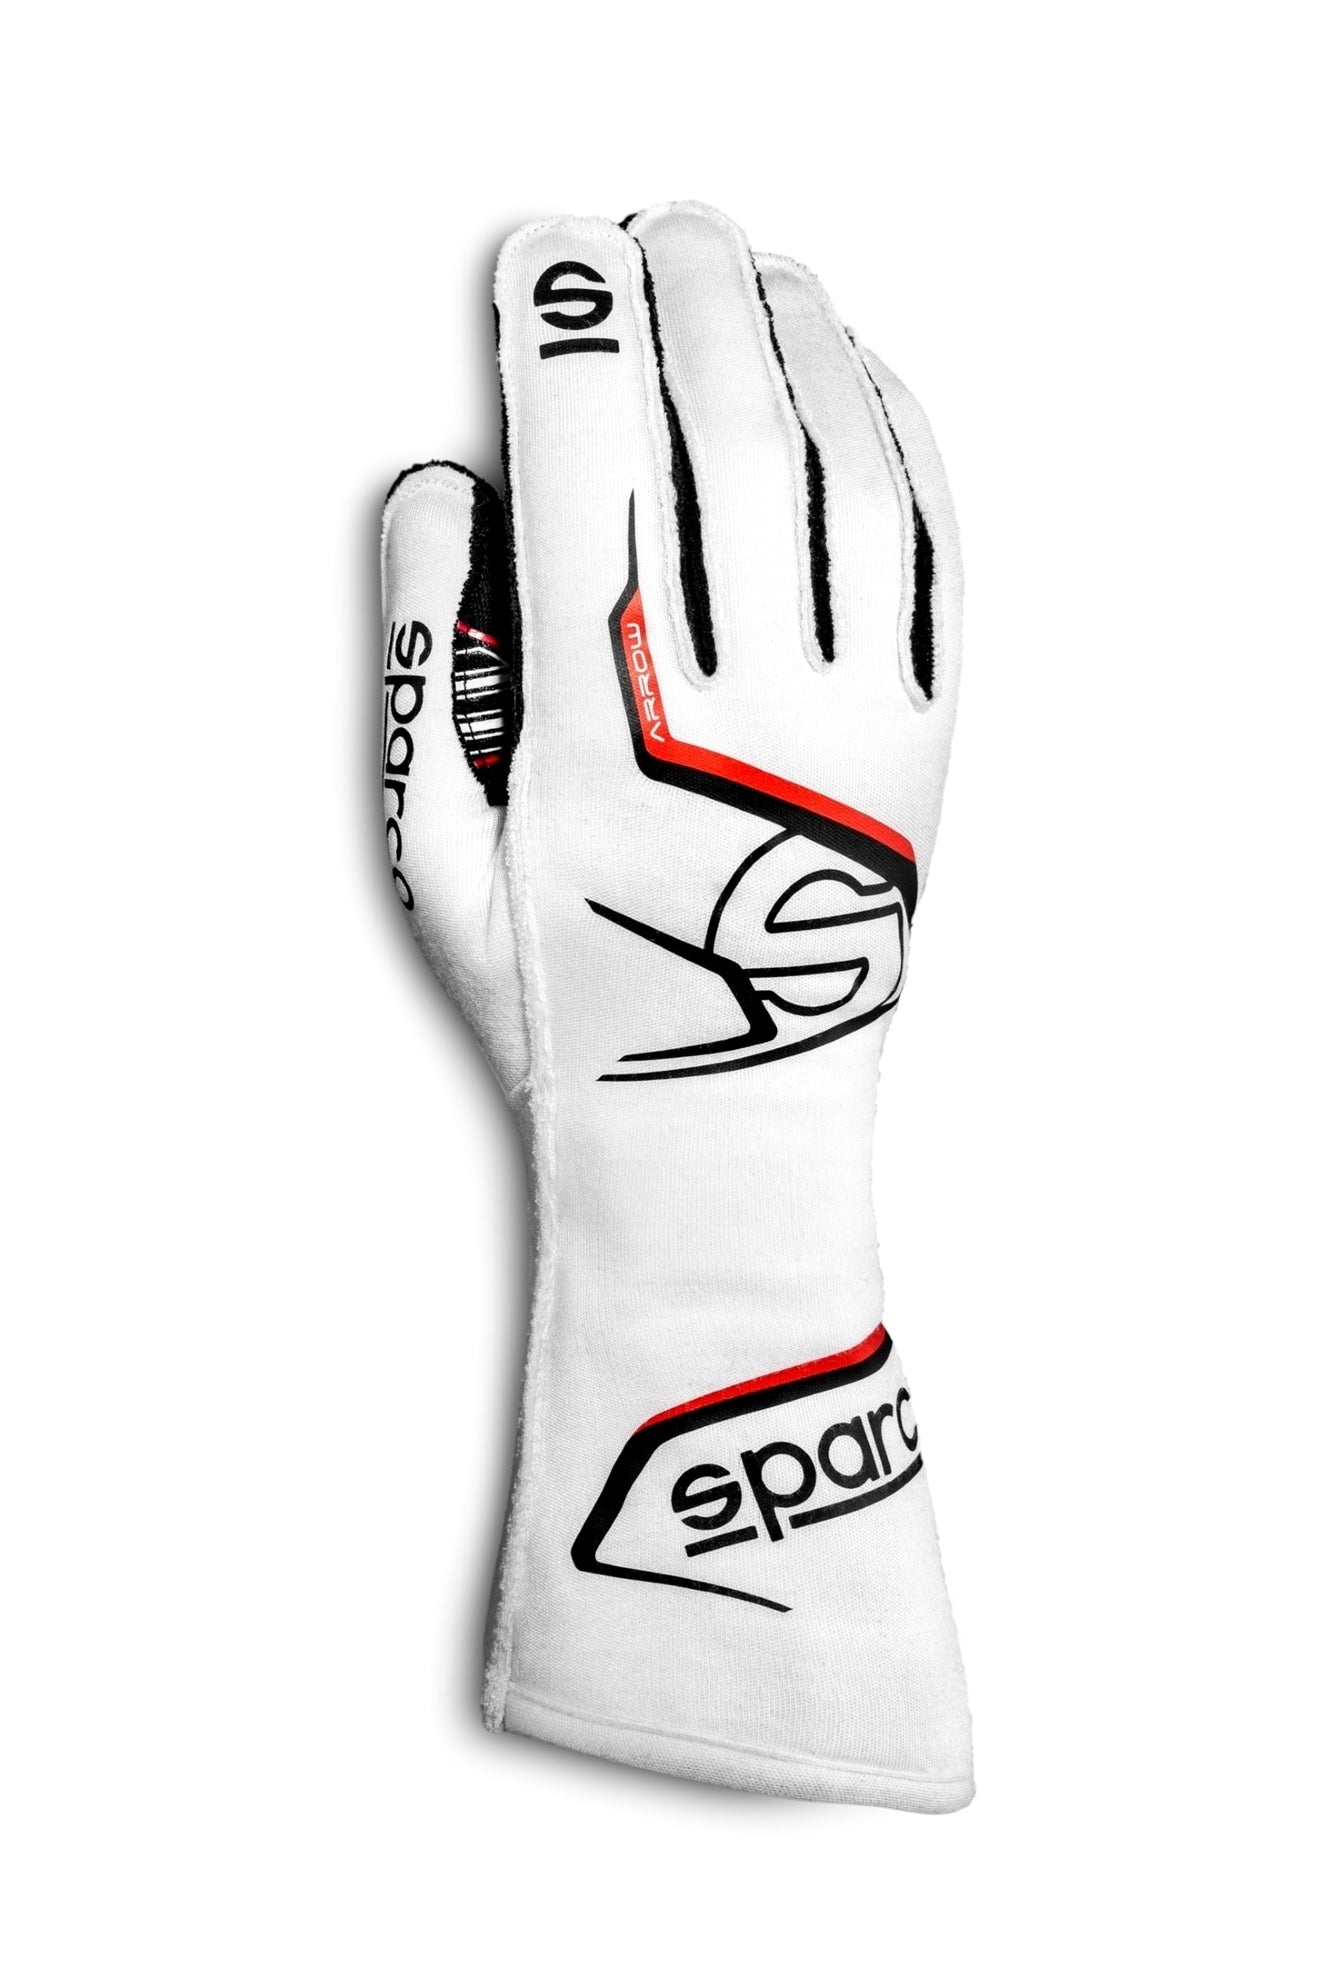 Sparco Arrow (2020) Racing Gloves – We Don't Lift Racing